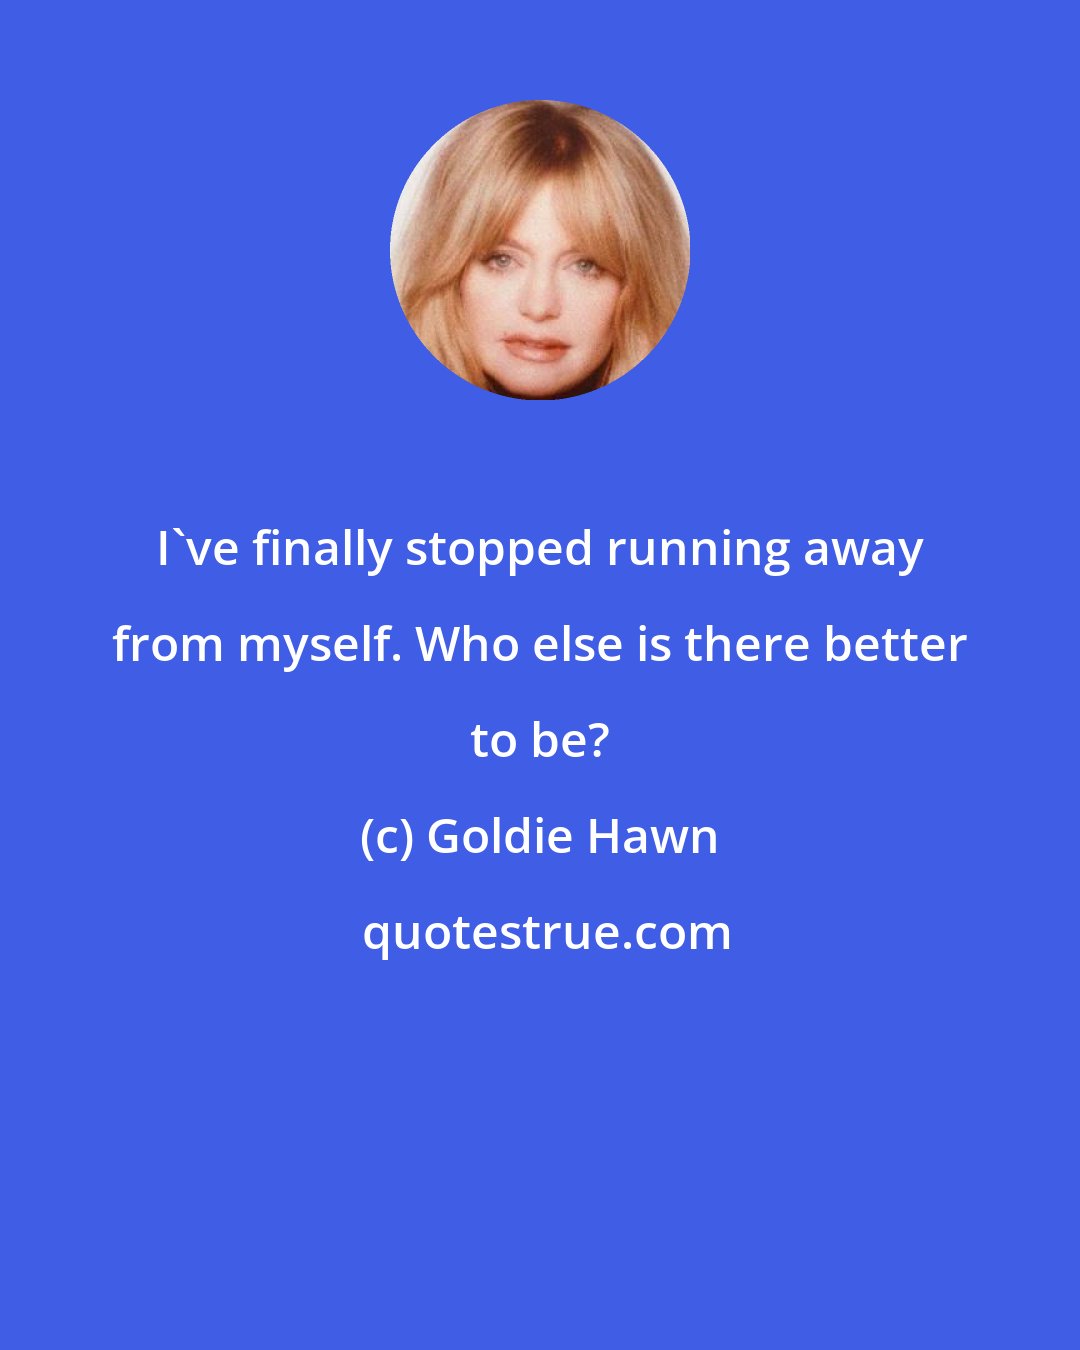 Goldie Hawn: I've finally stopped running away from myself. Who else is there better to be?